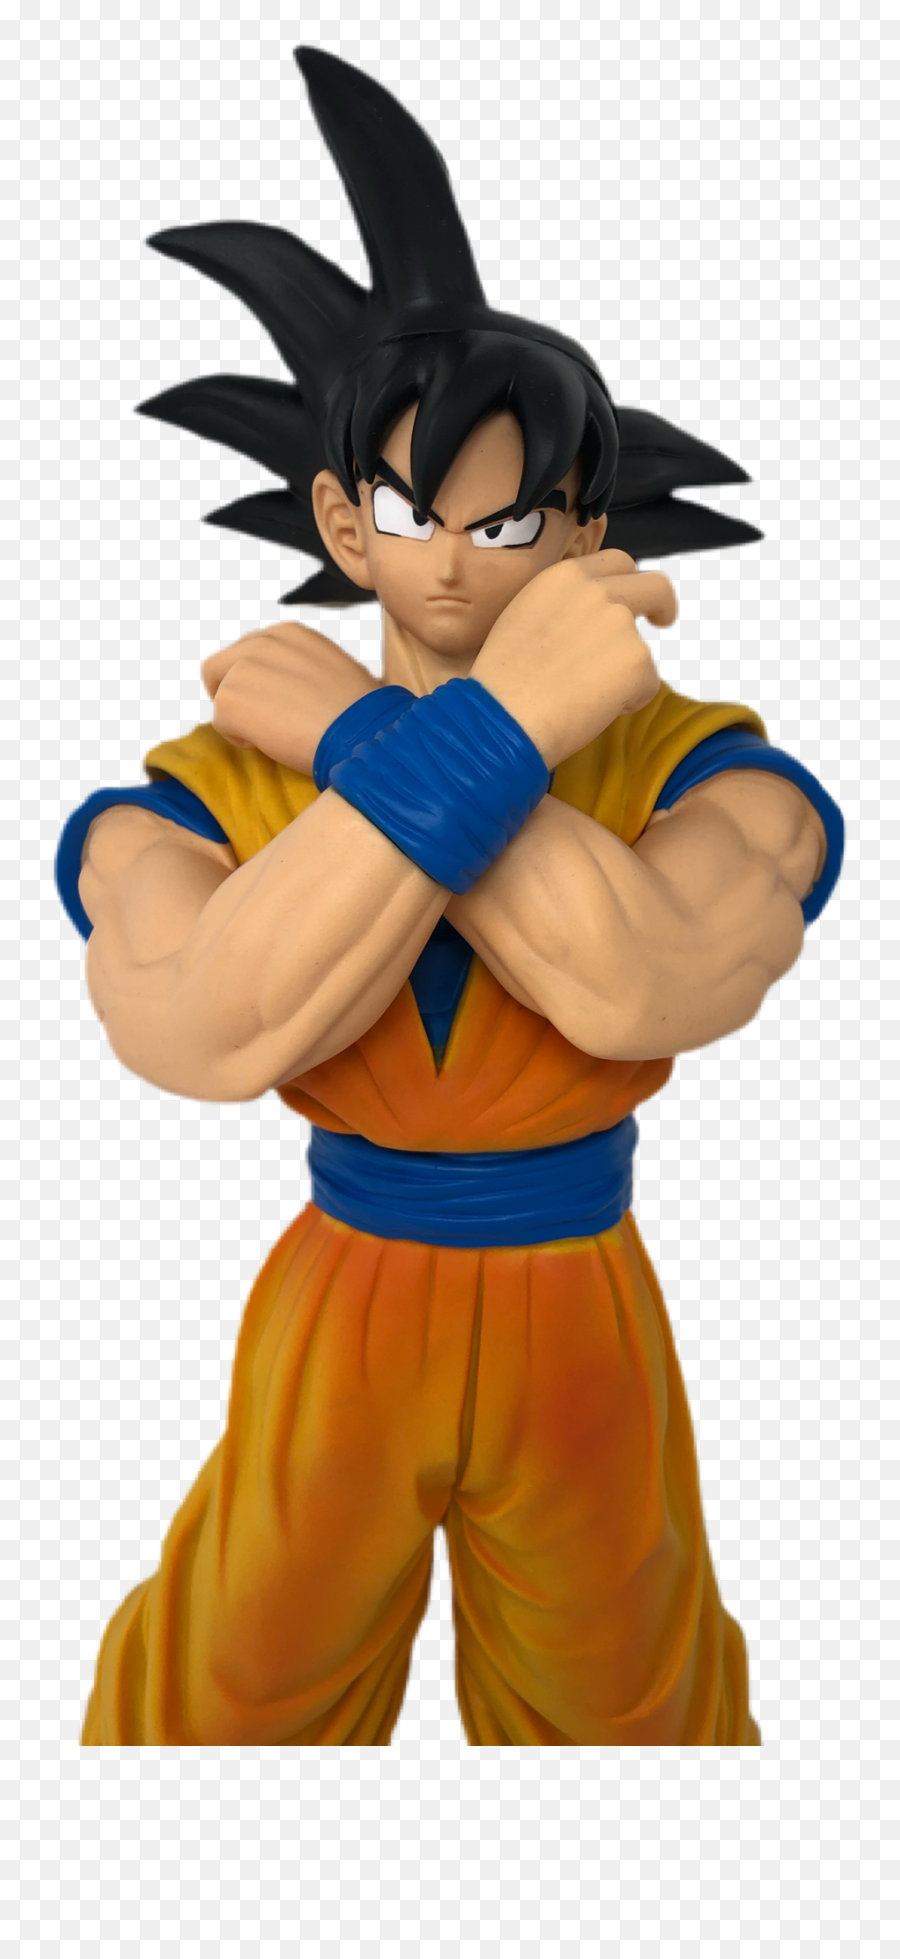 12 Tall Dragon Ball Z Action Figure Large Size Son Goku - Walmartcom 12 Tall Dragon Ball Z Action Figure Large Size Son Goku Figure Png,Icon Folder Windows 7 Anime